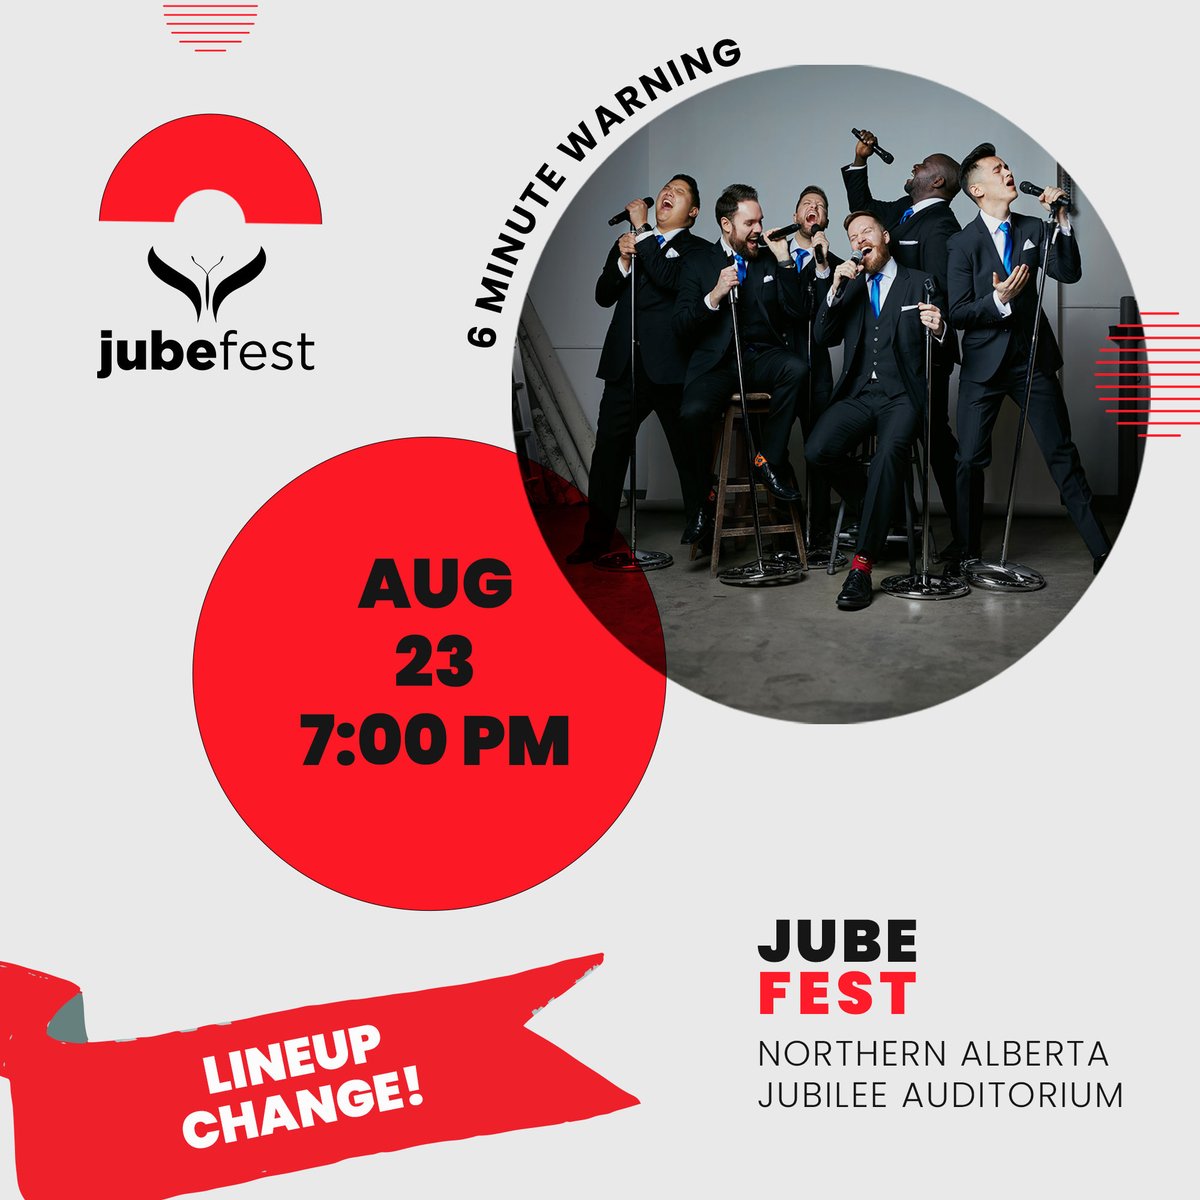 🎶 Tonight's the Night! Get Ready for @6MinuteWarning at Jubefest 🎉

Time: 7:00 PM
Venue: Northern Alberta Jubilee Auditorium

Join us this evening for an electrifying performance by 6 Minute Warning at Jubefest. Tickets at jubileeauditorium.com

#Jubefest #LiveMusic #yyc